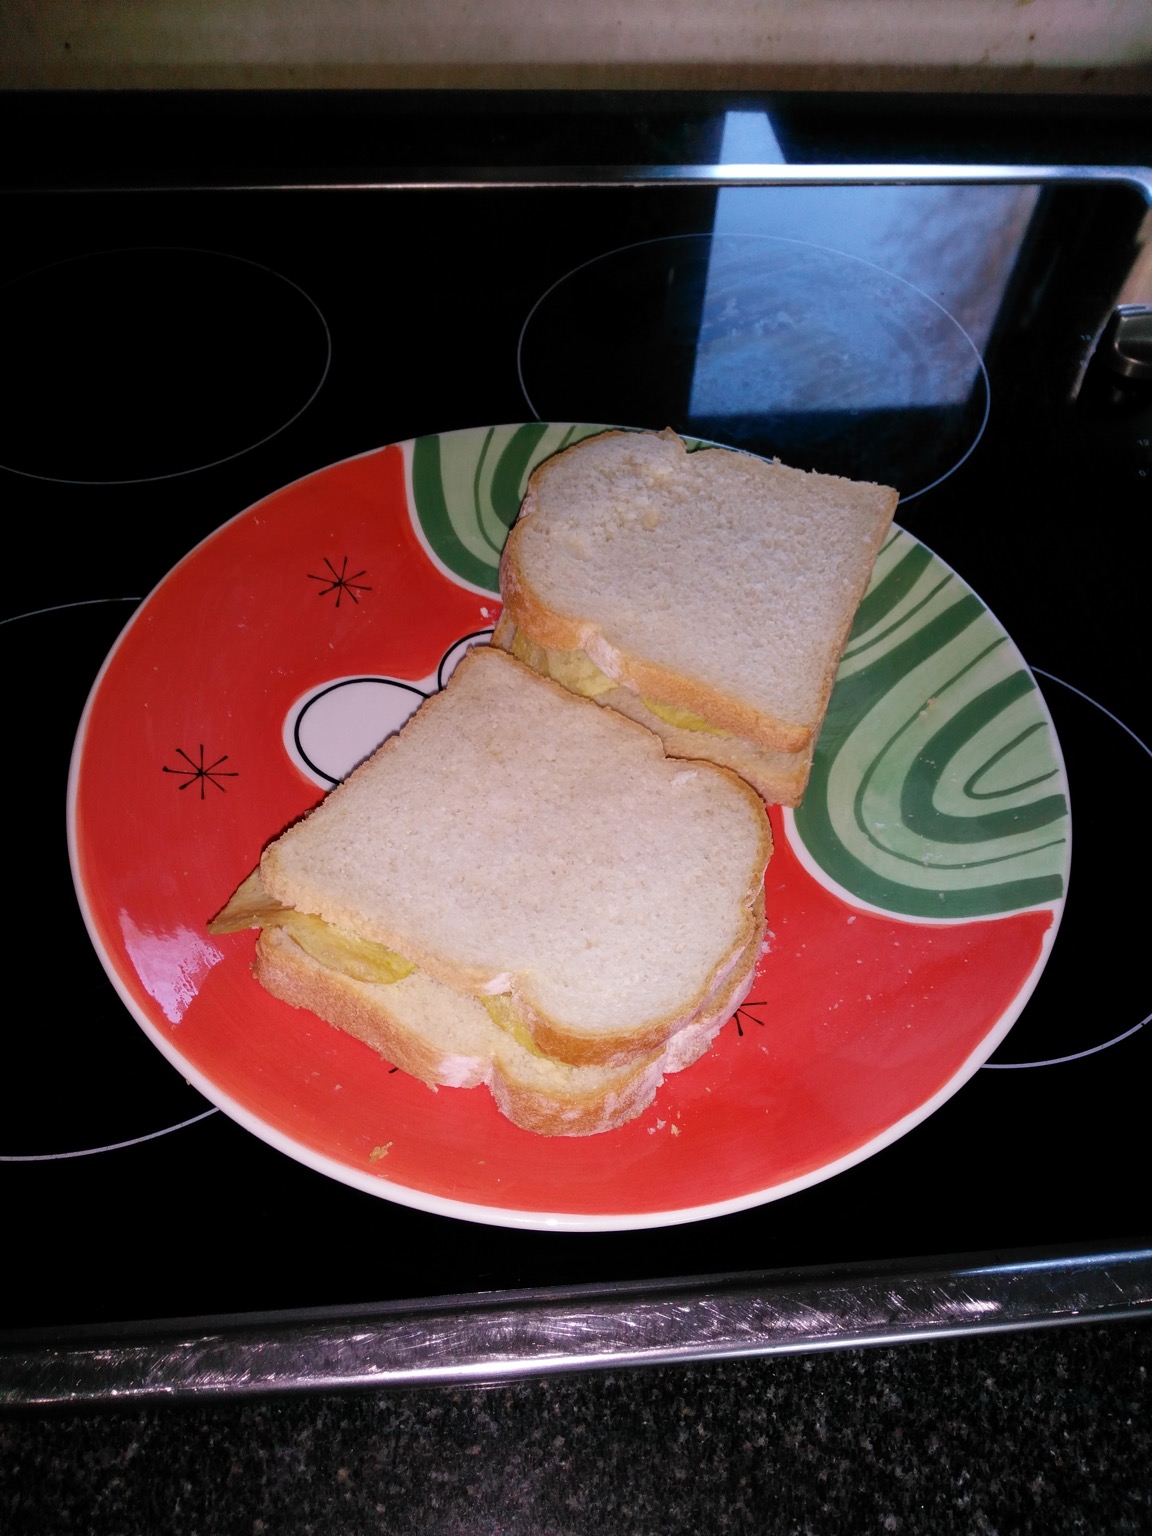 Two sandwiches of sliced white bread with crisps